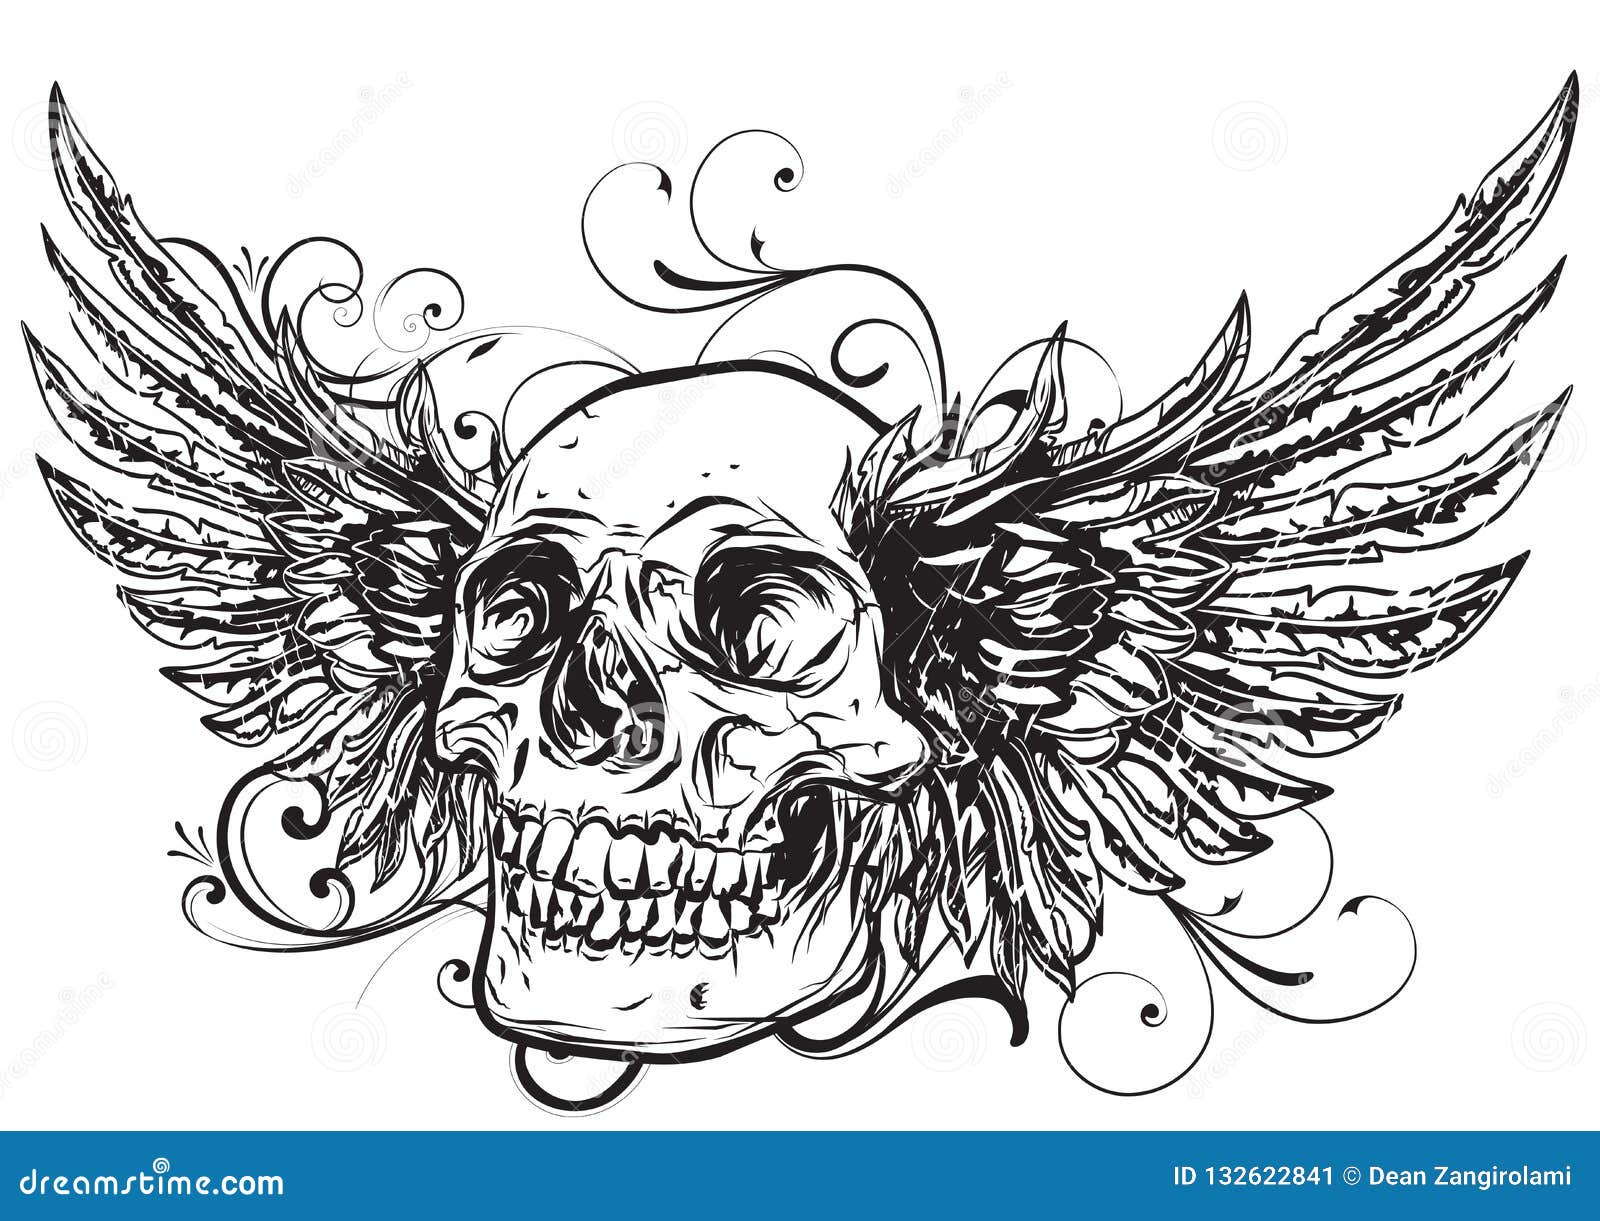 81 Skulls With Wings Tattoos High Res Illustrations  Getty Images